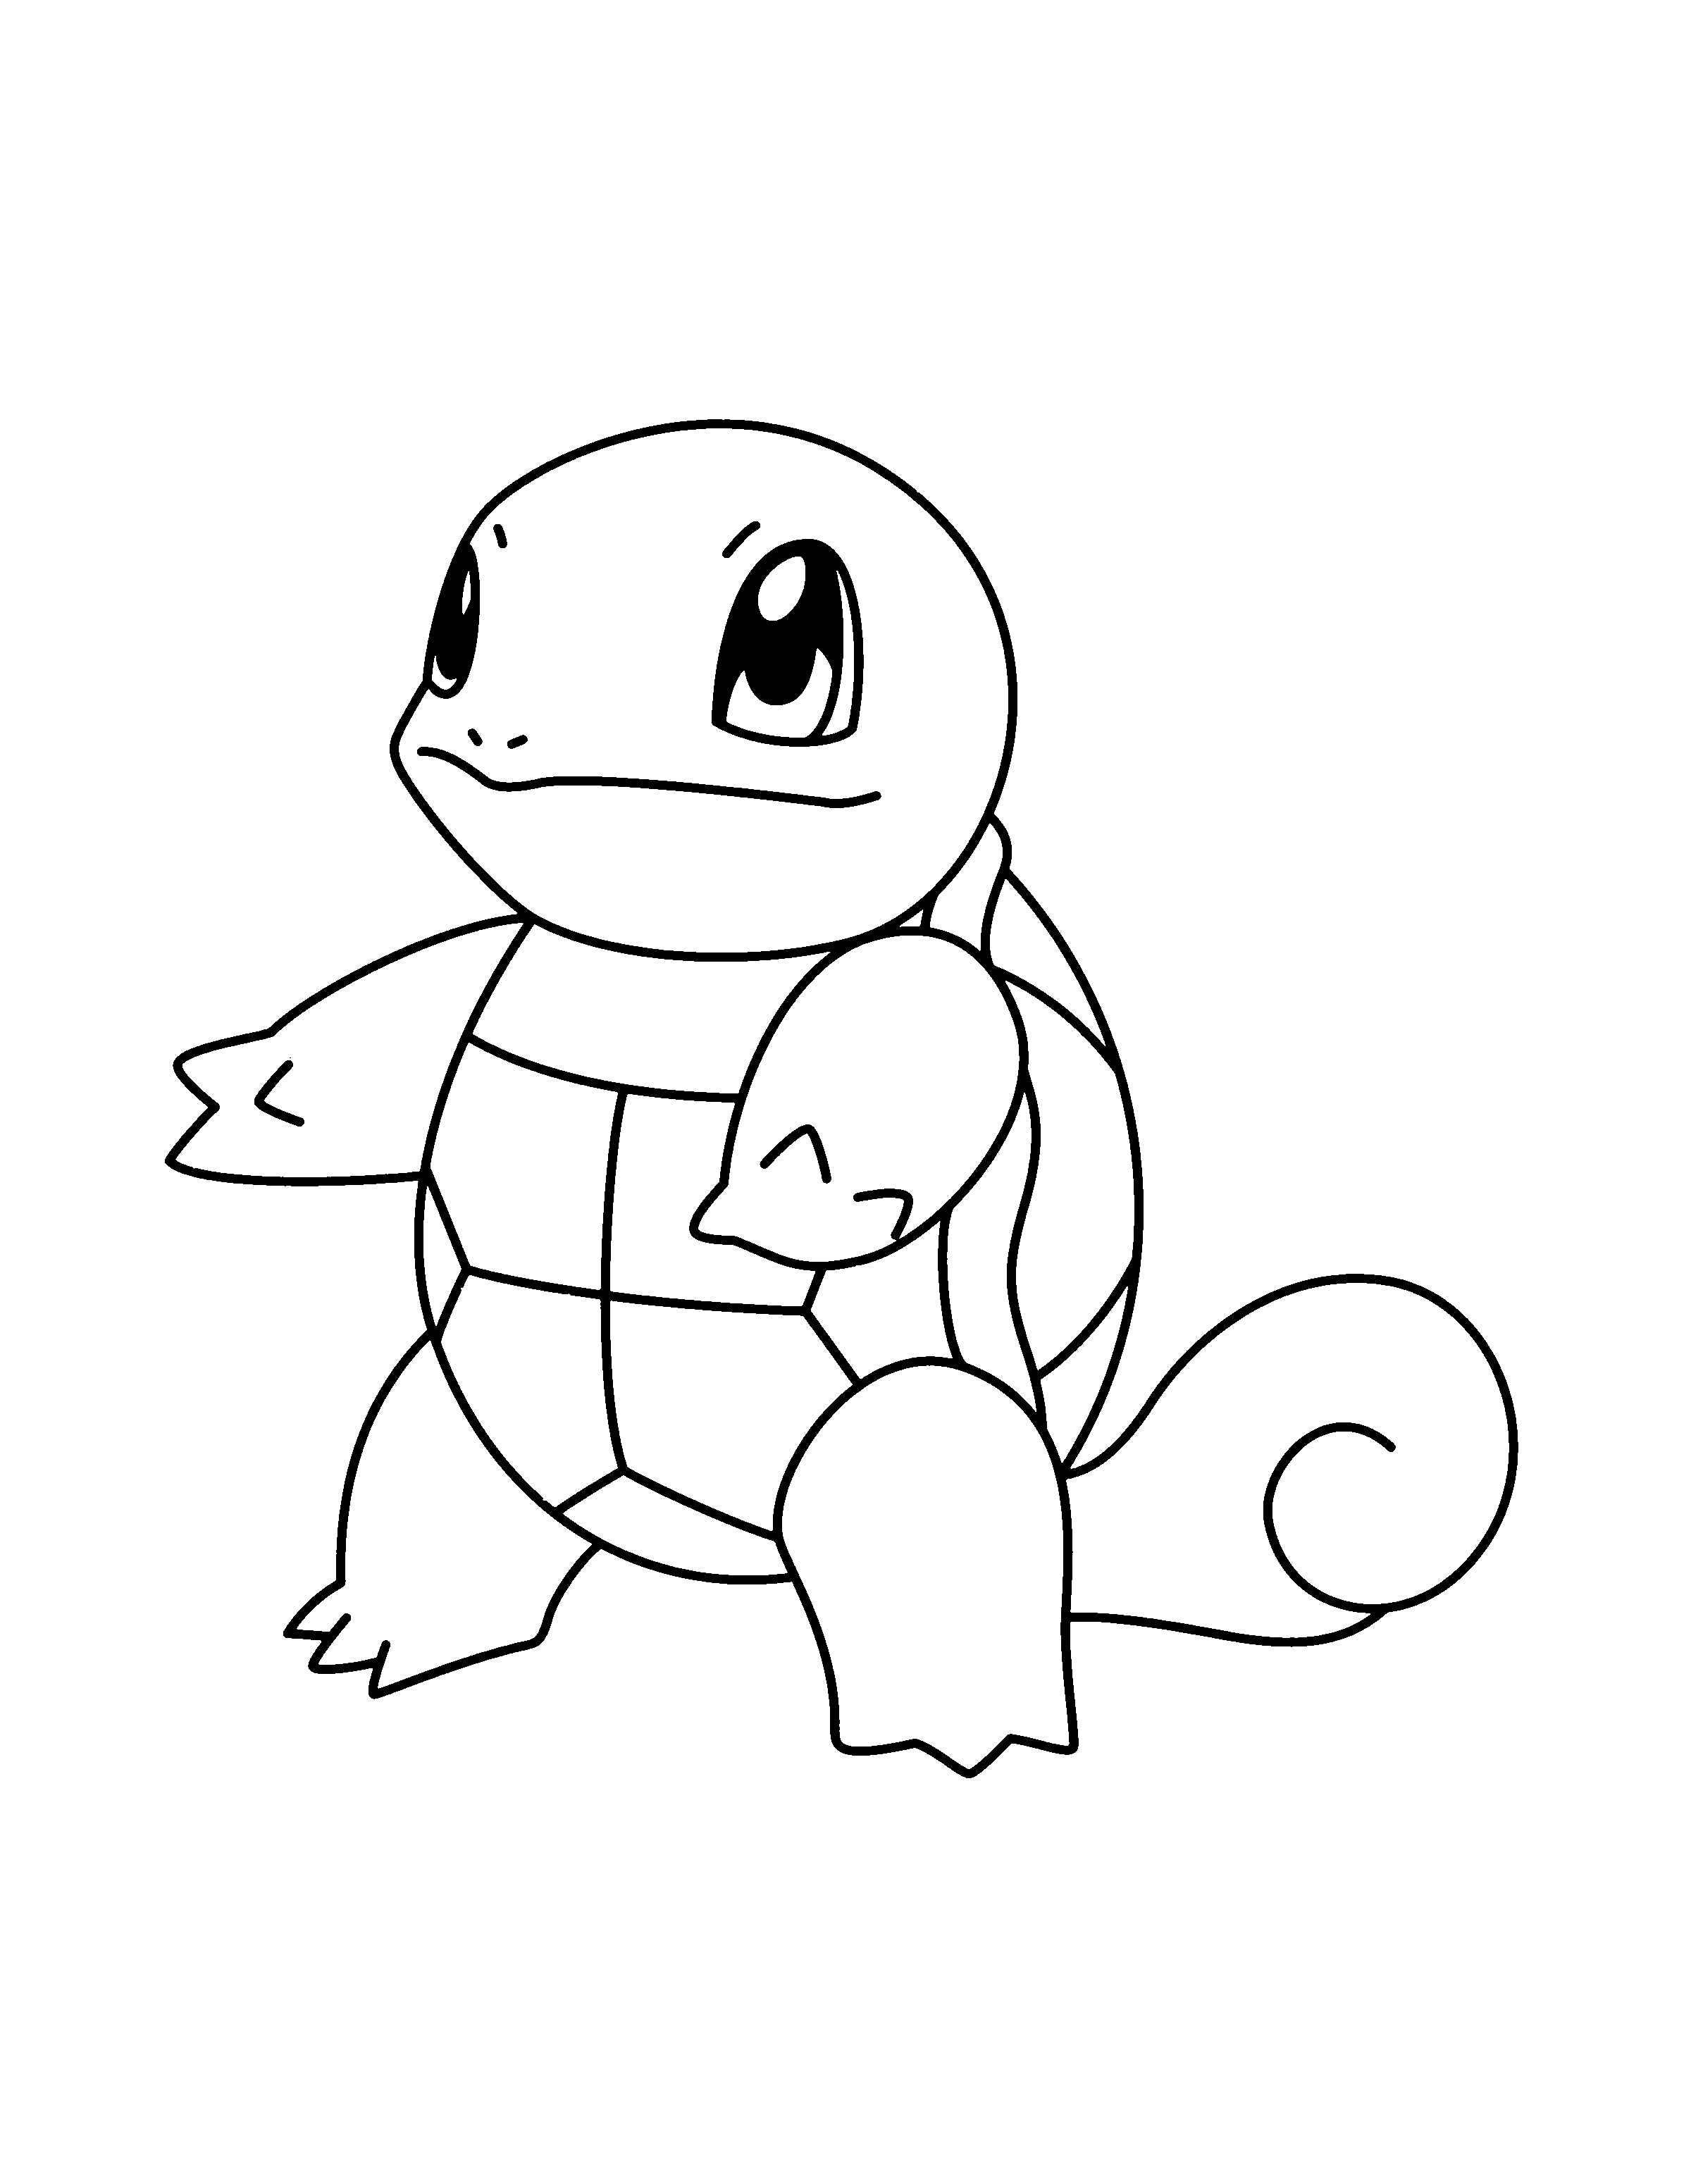 Coloring Page Pokemon Advanced Coloring Pages 160 Pokemon Coloring Pages Pokemon Sten